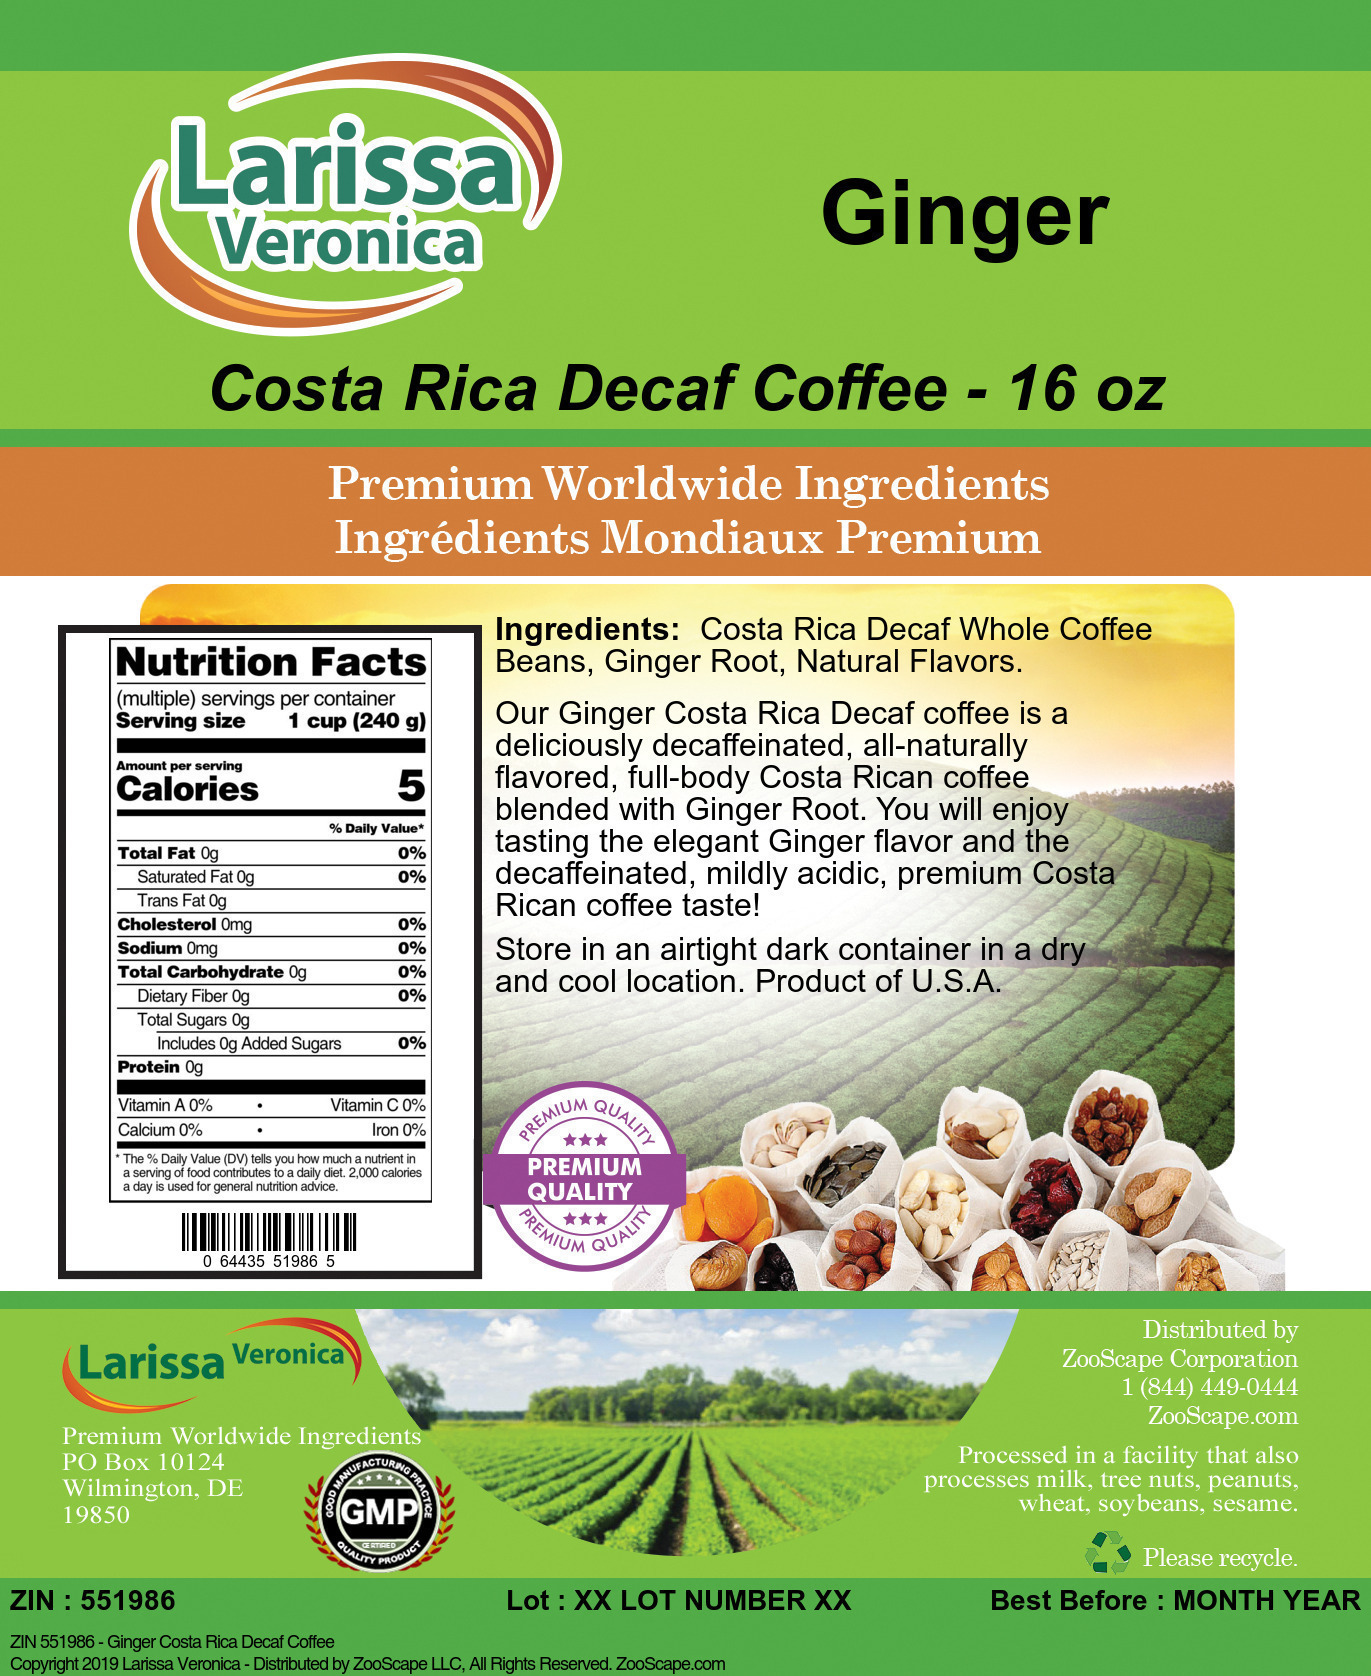 Ginger Costa Rica Decaf Coffee - Label